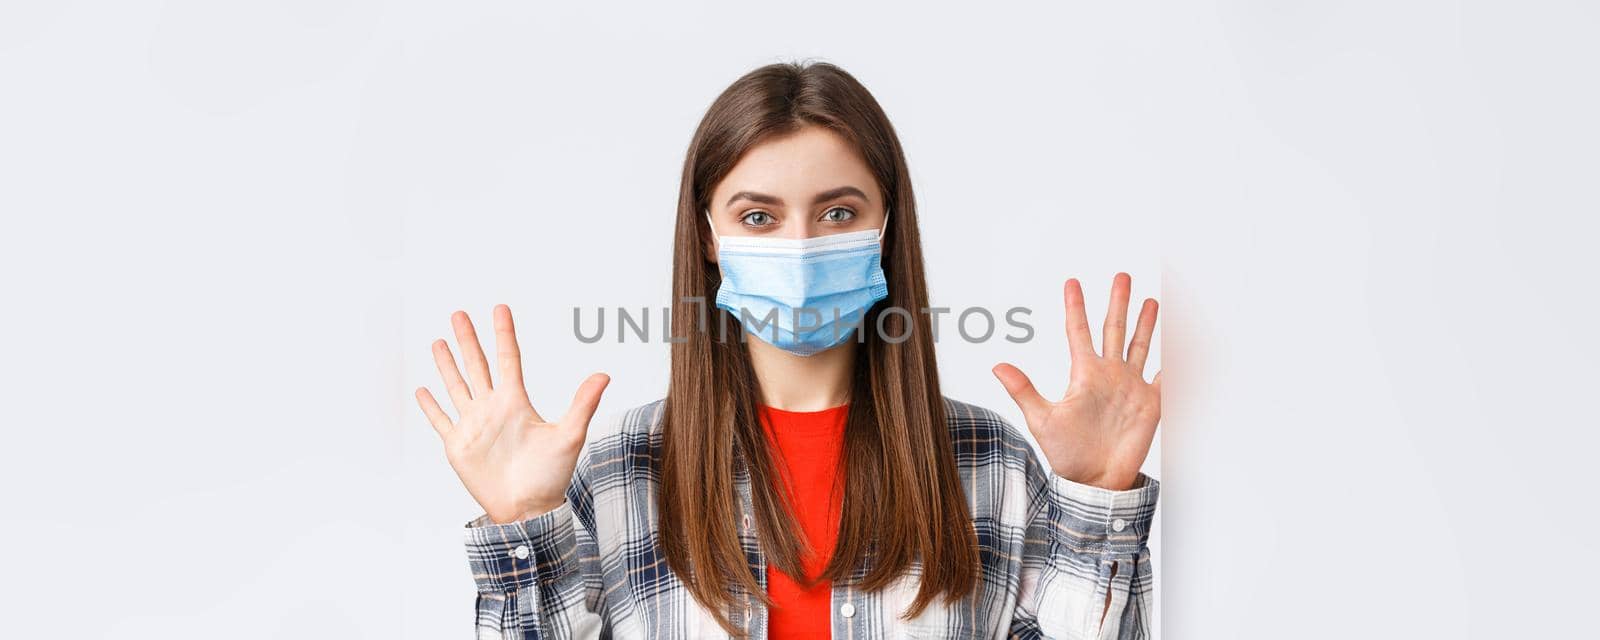 Coronavirus outbreak, leisure on quarantine, social distancing and emotions concept. Attractive caucasian woman in medical mask show ten fingers, amount or quantity, white background.